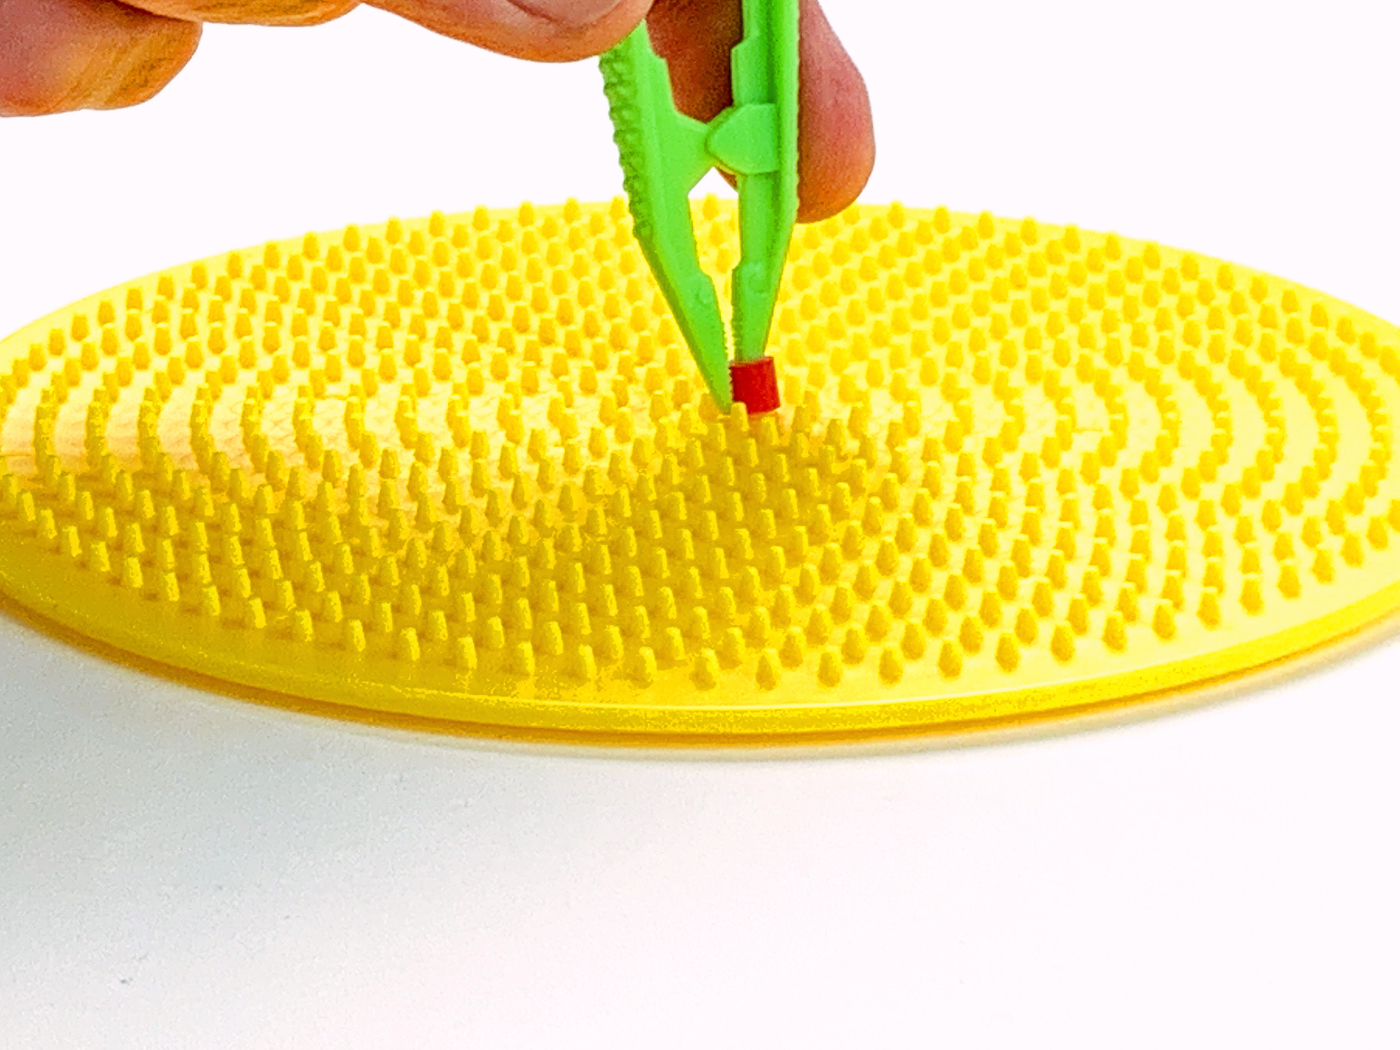 Placing a bead onto the pegboard with tweezers